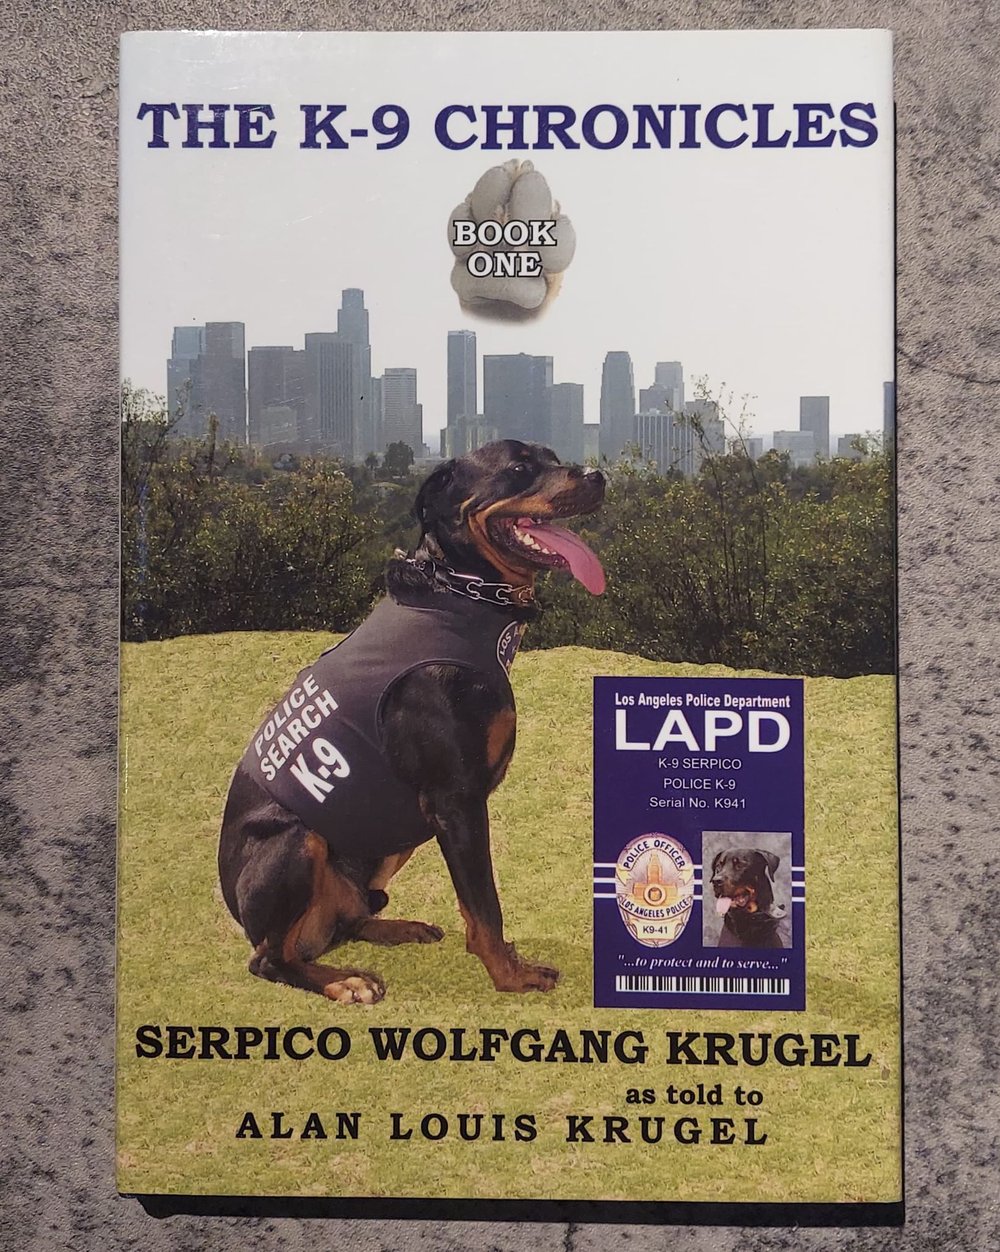 The K-9 Chronicles: Book One, by Serpico Wolfgang Krugel - SIGNED